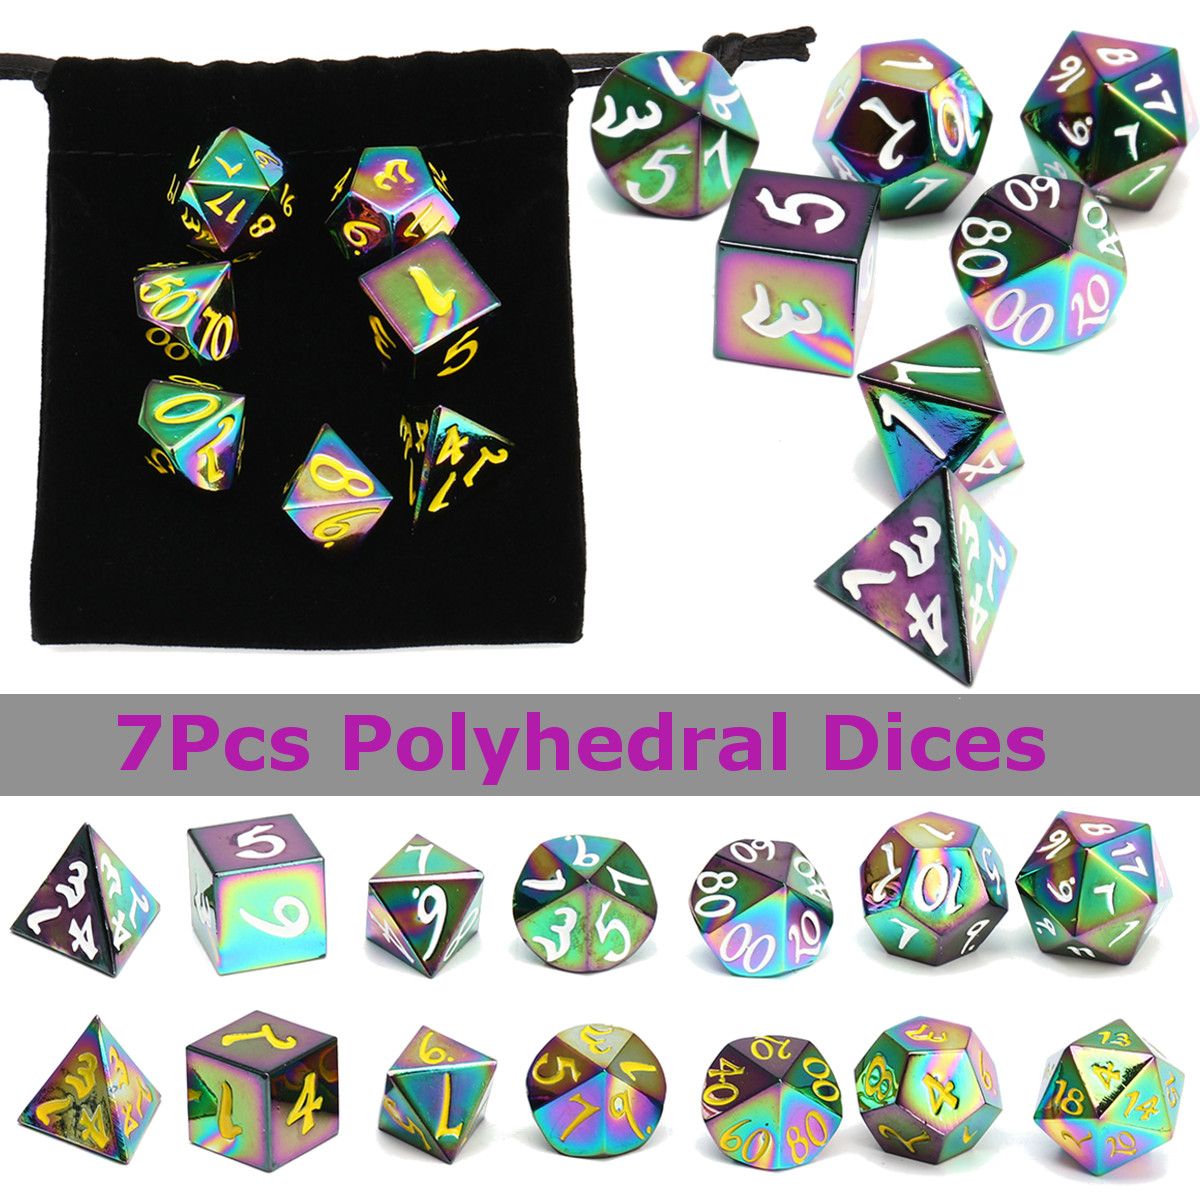 7Pcs-Antique-Metal-Polyhedral-Dices-Set-Role-Playing-Game-Gadget-With-Bag-1287723